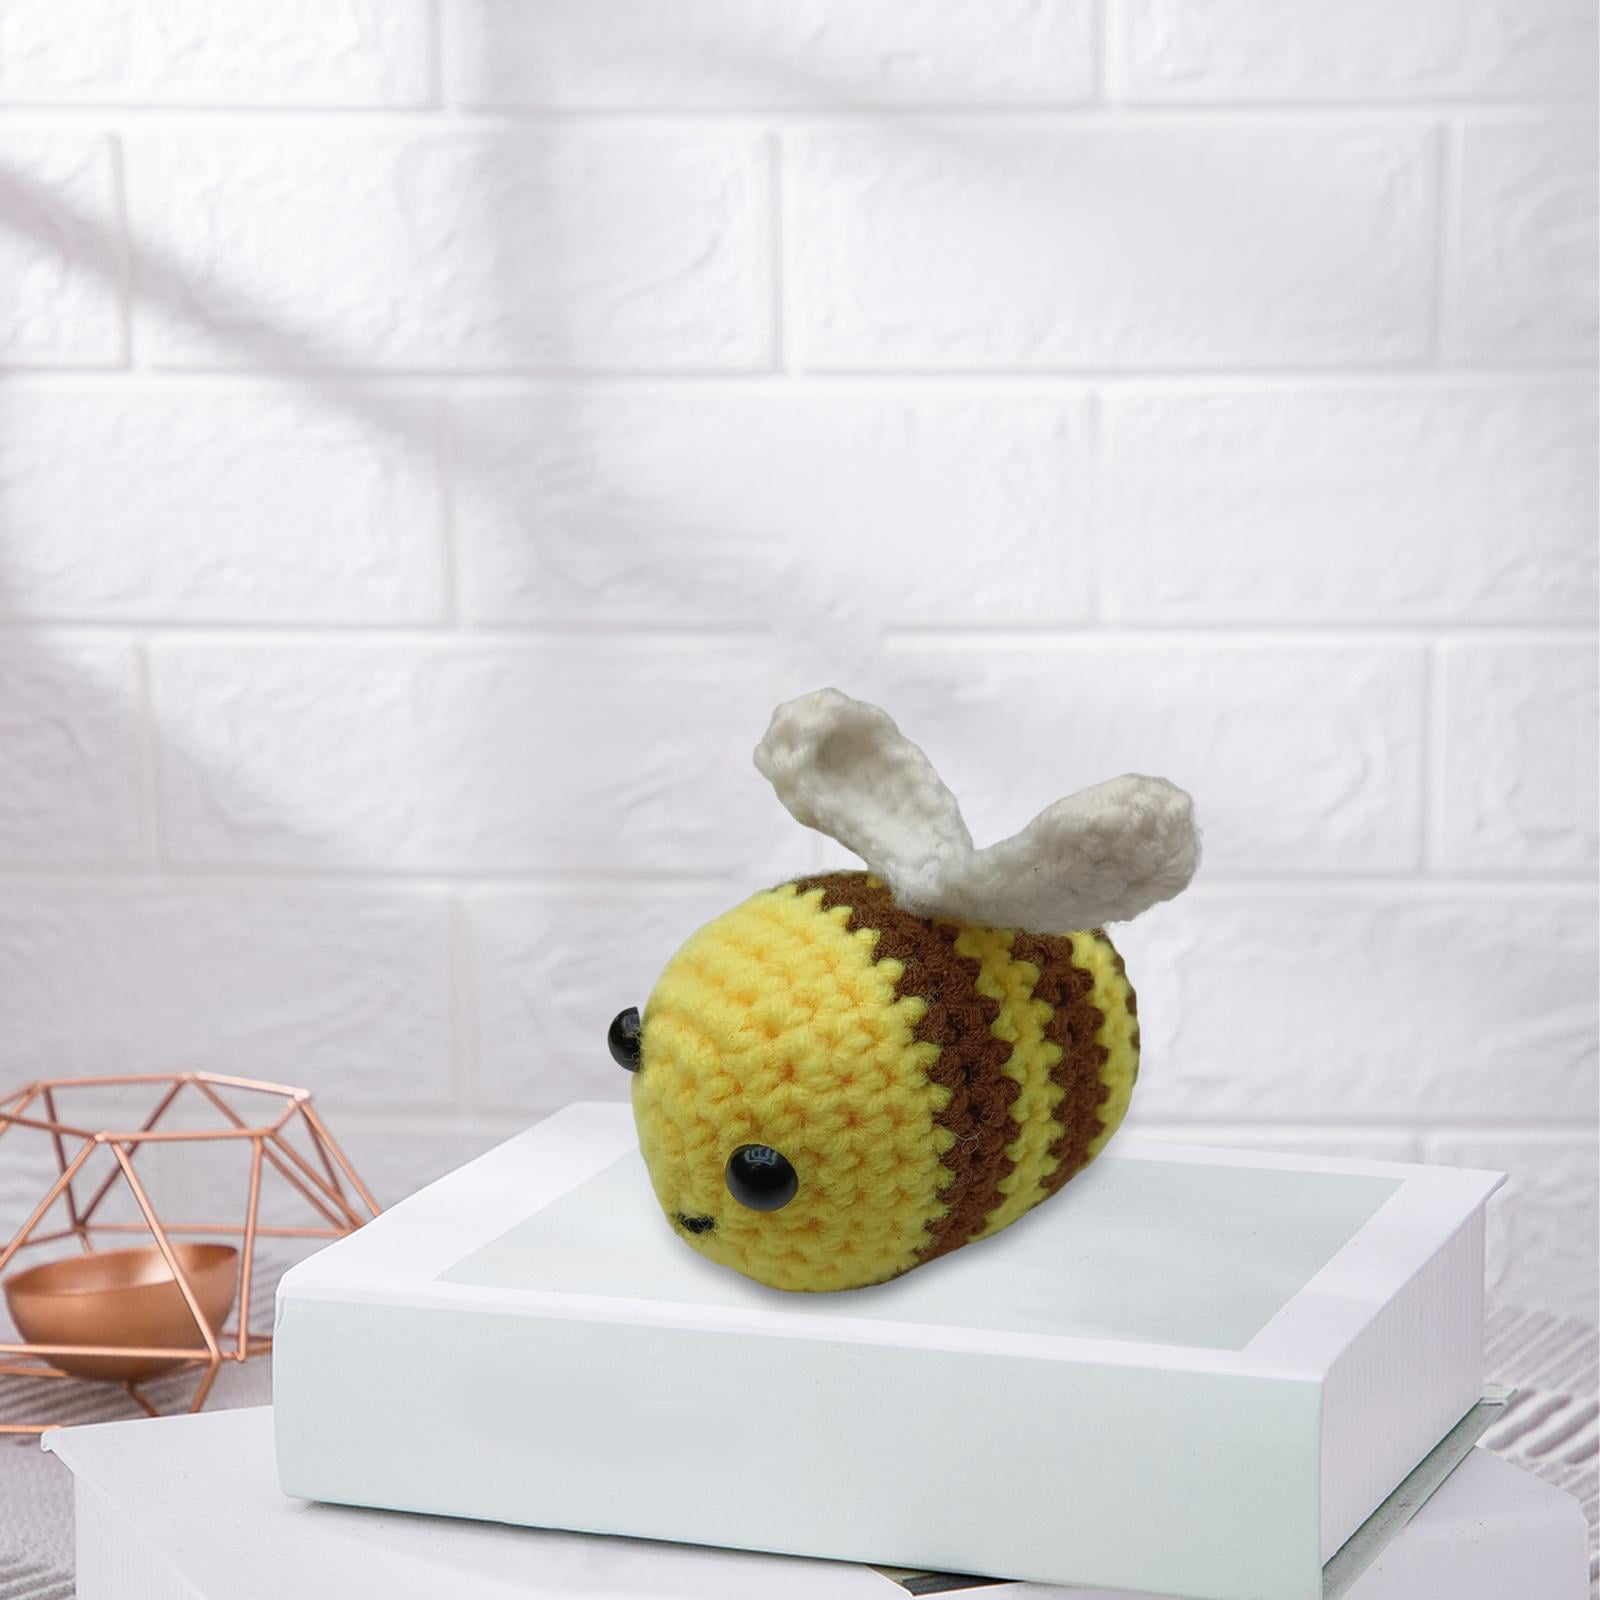 Beginner'S Crochet Kit For Adults To Diy 2-3 Adorable Little Bees, Suitable  For Dolls Gifts, Stress Relief And Knitting Learning, Including Complete  Material Pack, Guided Video Tutorials, English Instructions, Crochet Hook,  Scissors